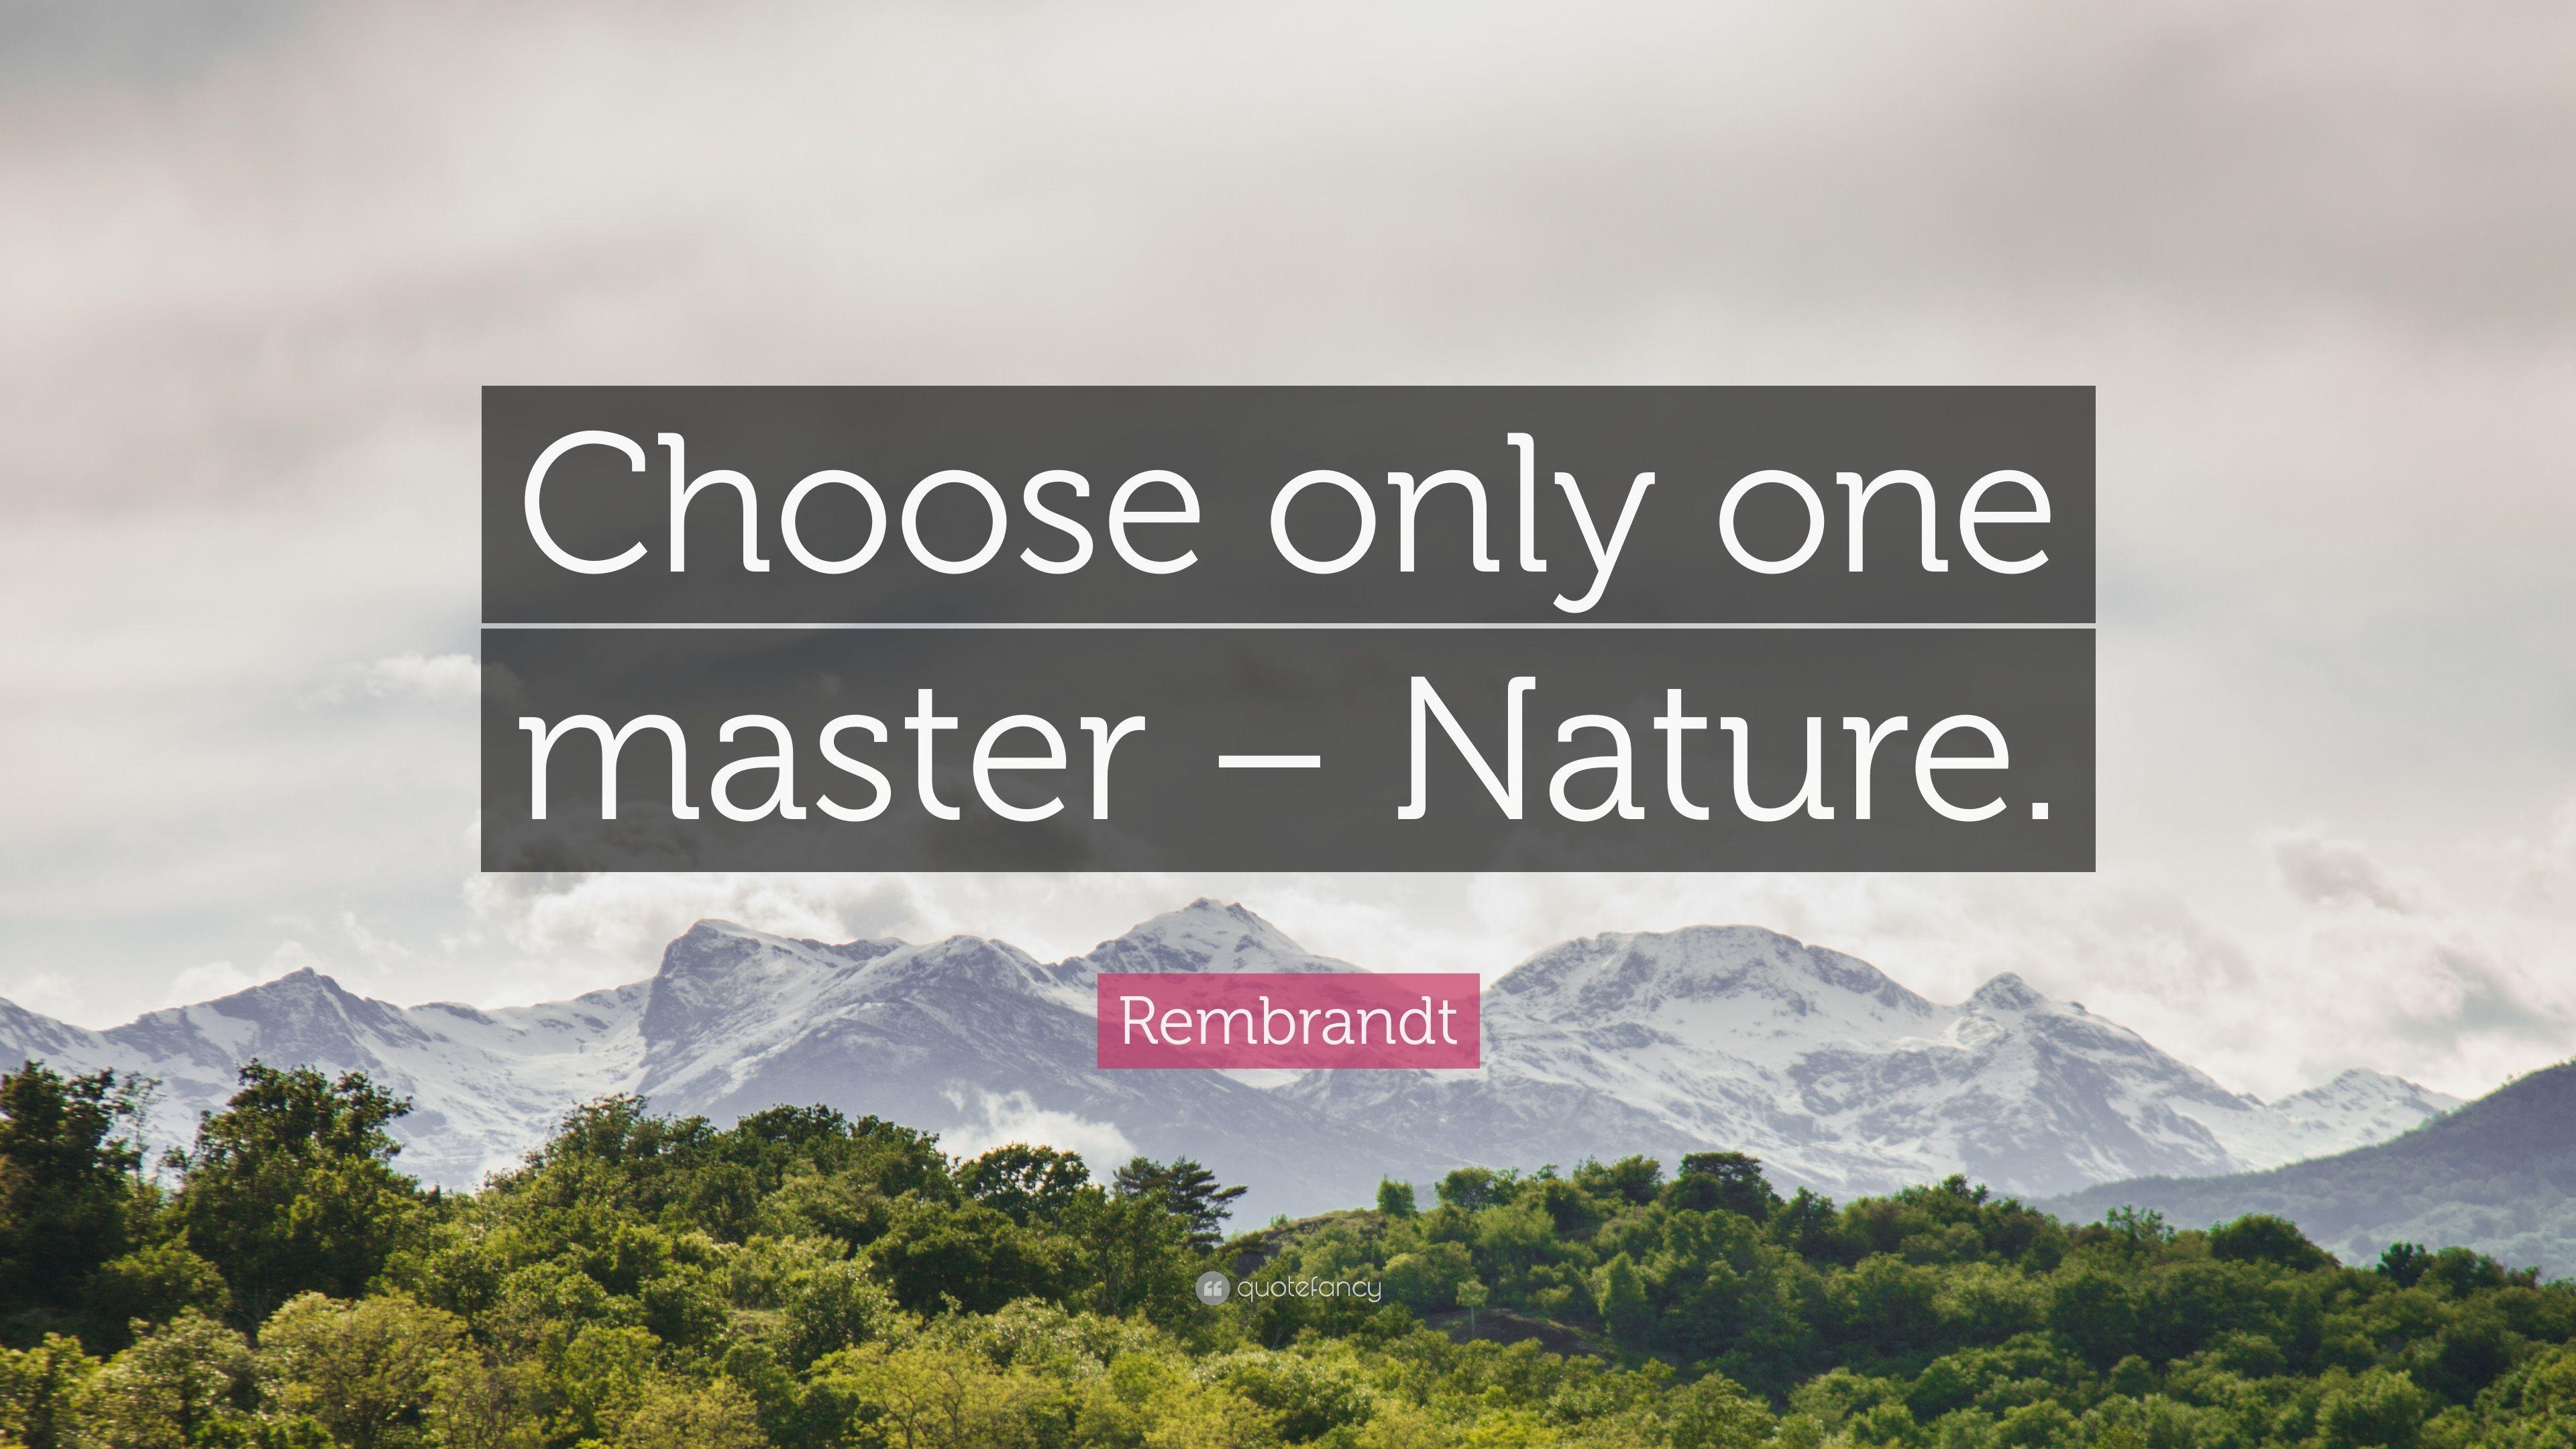 Rembrandt Quote: “Choose only one master